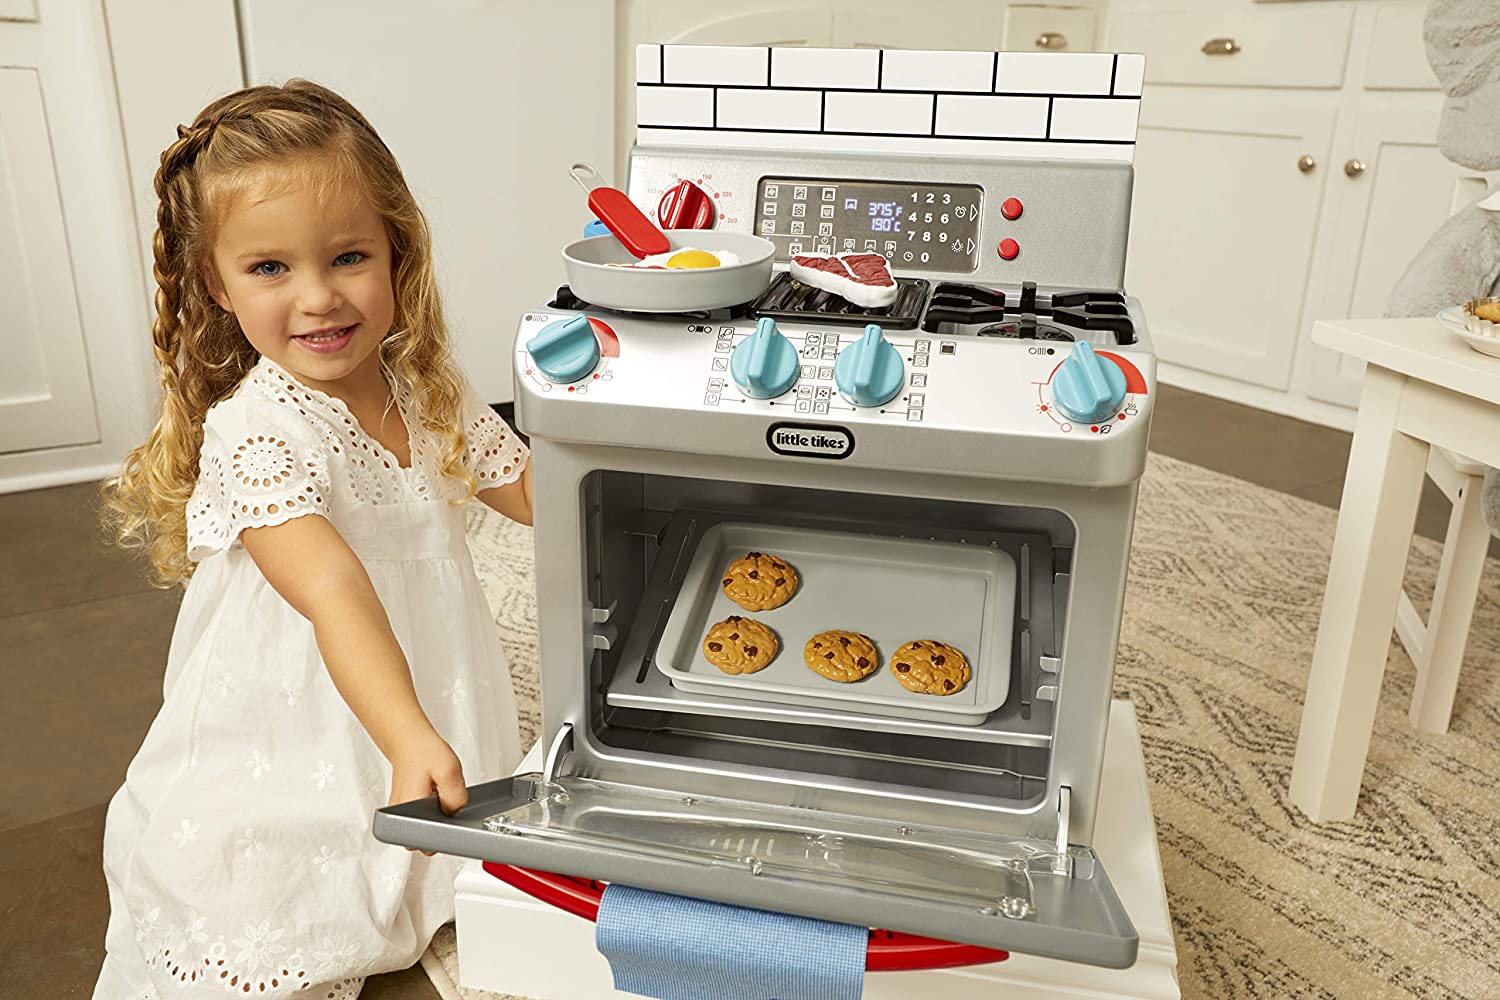 https://discounttoday.net/wp-content/uploads/2022/12/Little-Tikes-First-Oven-Realistic-Pretend-Play-Appliance-for-Kids-Play-Kitchen-with-11-Accessories-and-Realistic-Cooking-Sounds-Unique-Toy-Multi-Color-Ages-22.jpg